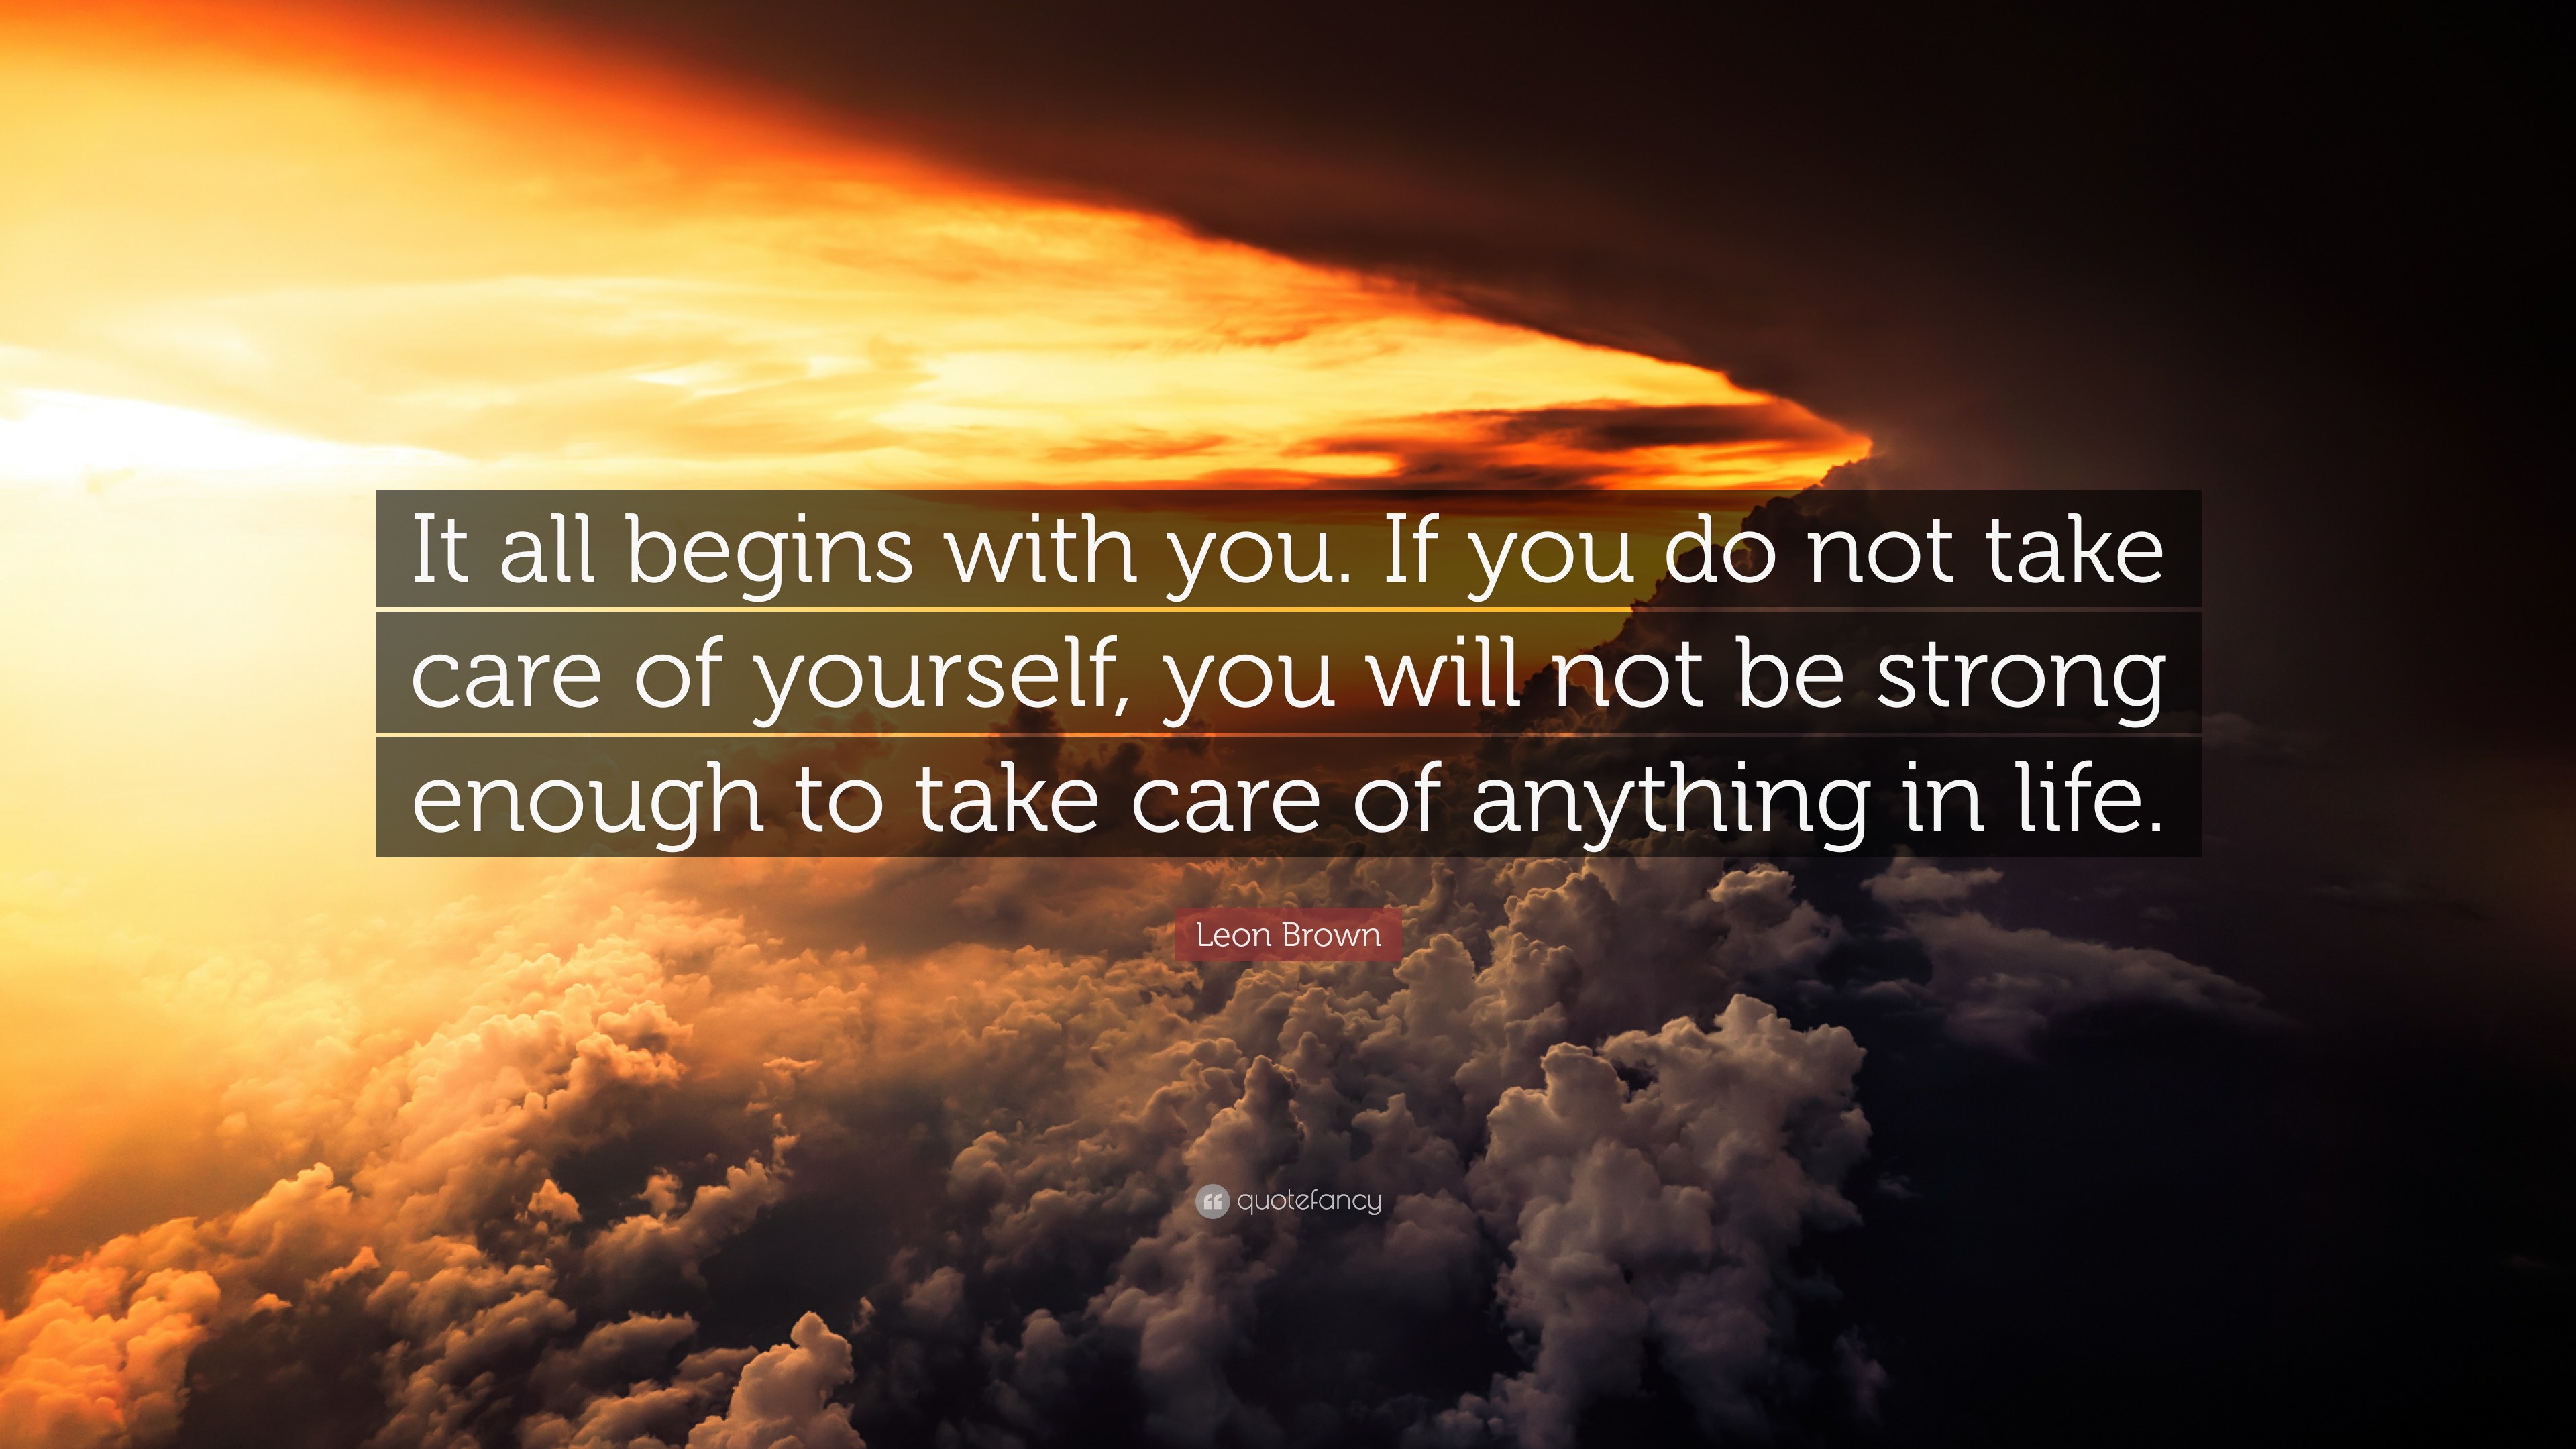 Leon Brown Quote It All Begins With You If You Do Not Take Care Of Yourself You Will Not Be Strong Enough To Take Care Of Anything In L